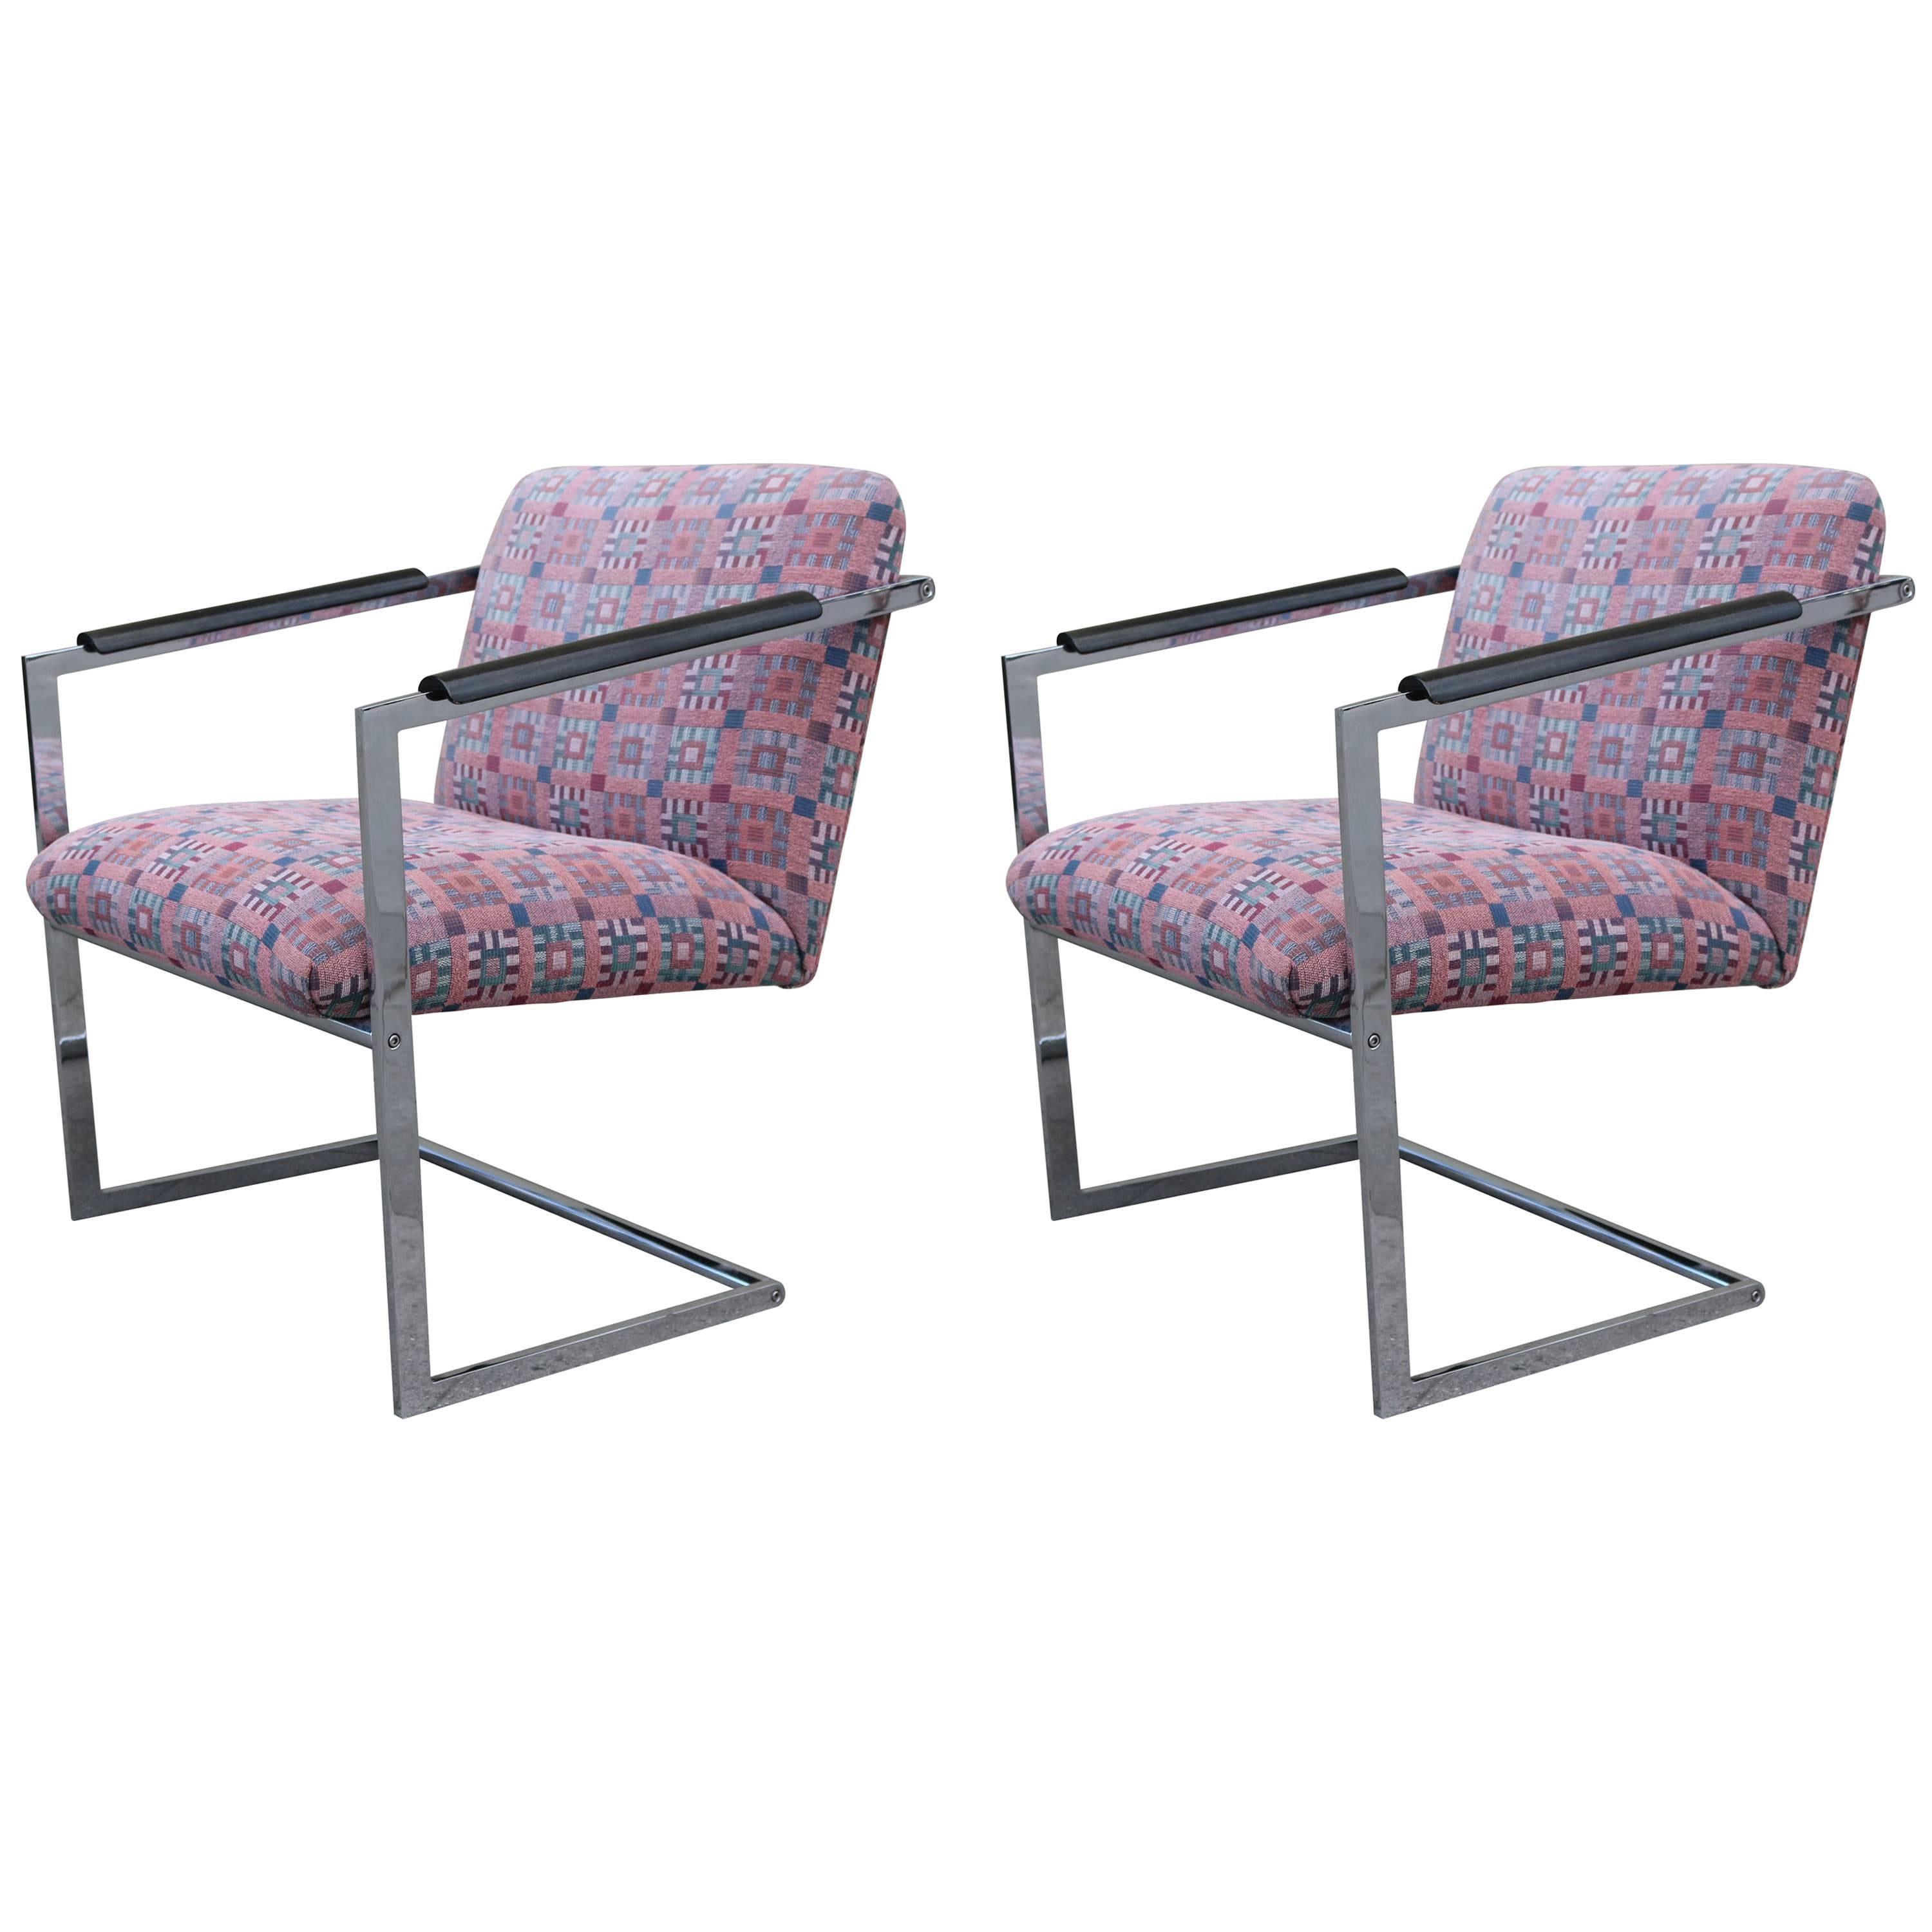 Pair of Architectural Chrome Chairs by Richard Thompson for Glenn of California